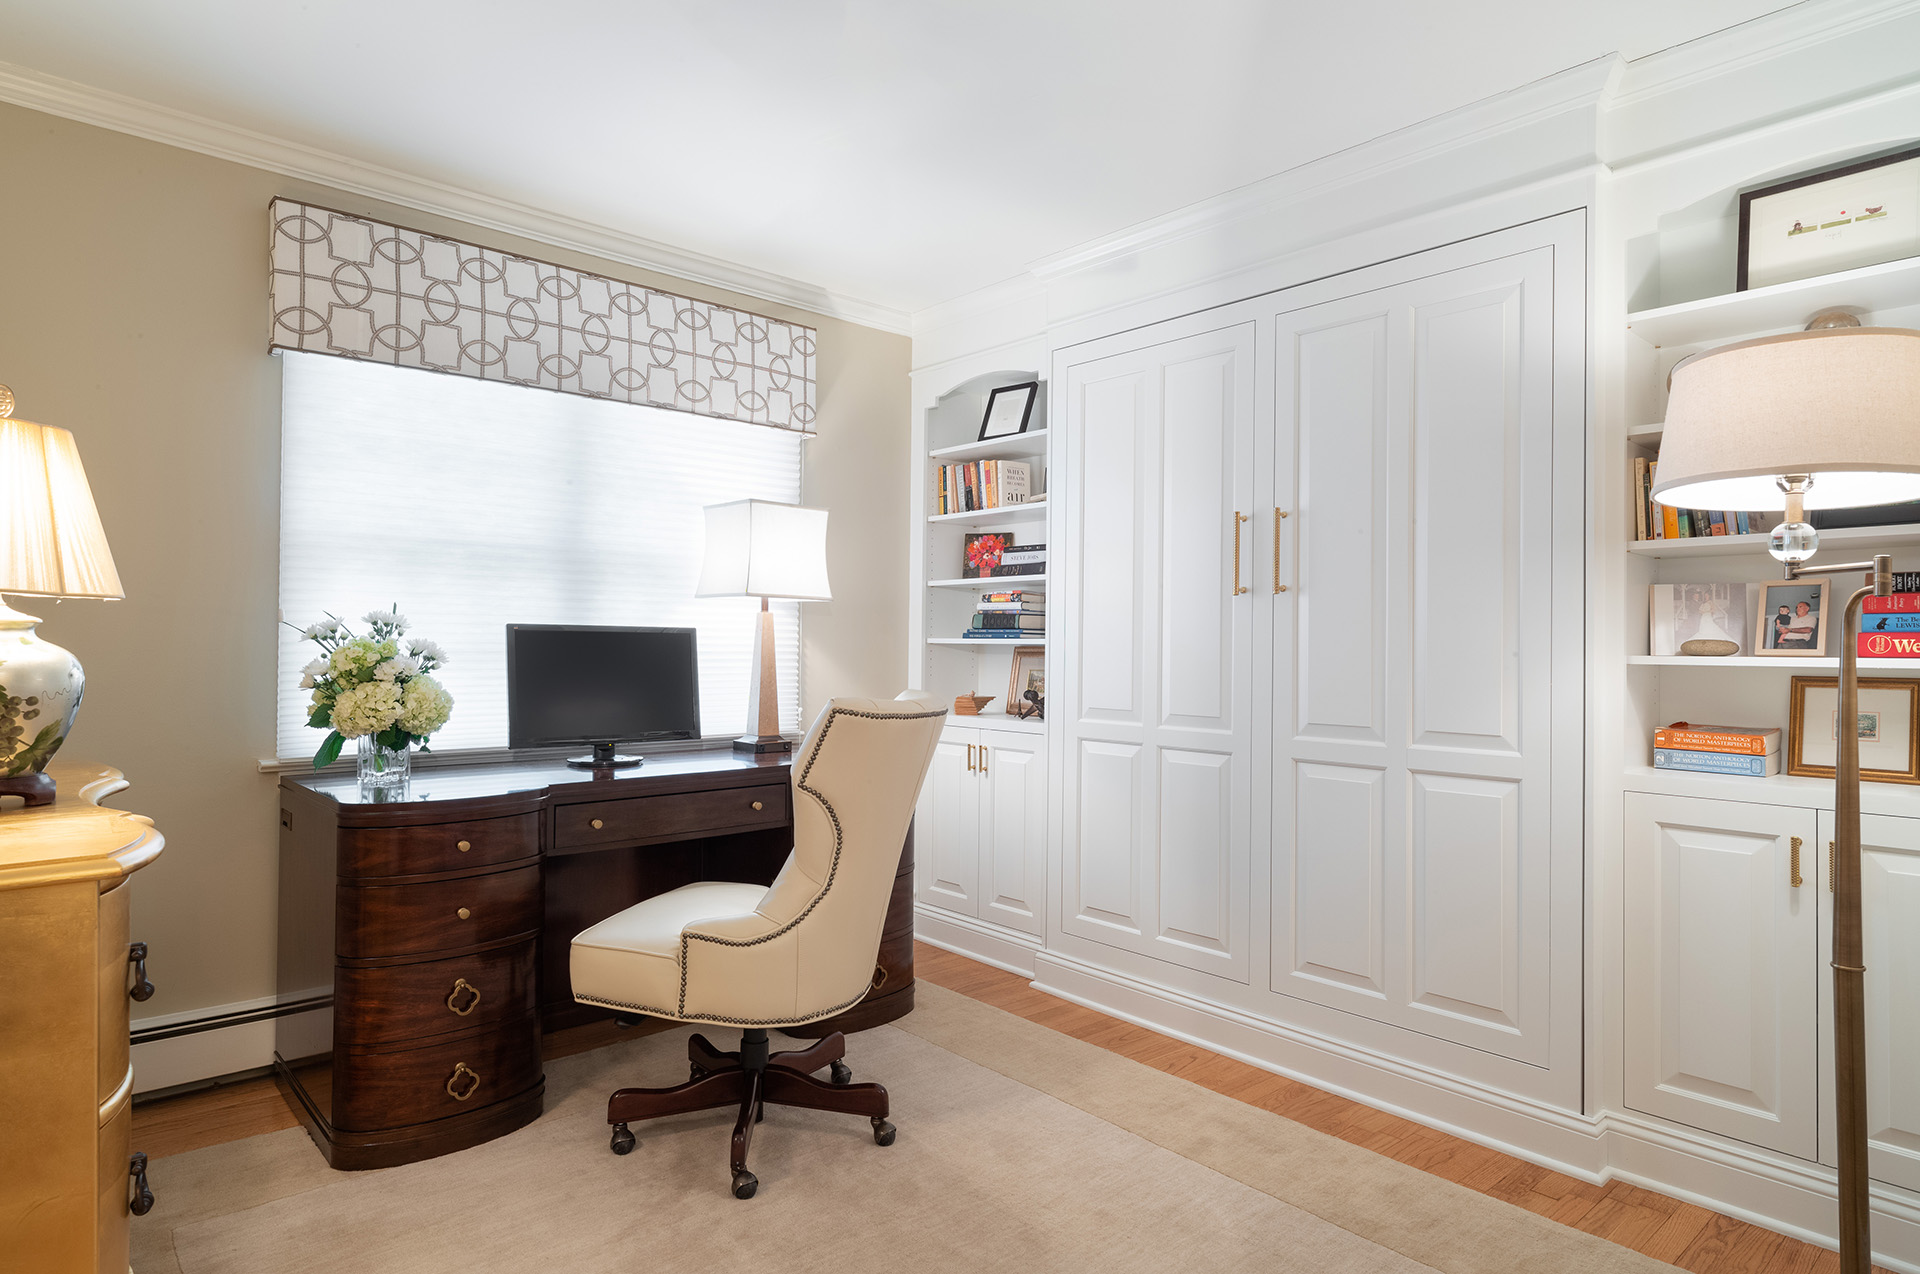 DESIGNING THE PERFECT HOME OFFICE – Top 5 Things to Consider When Setting Up Your Workspace